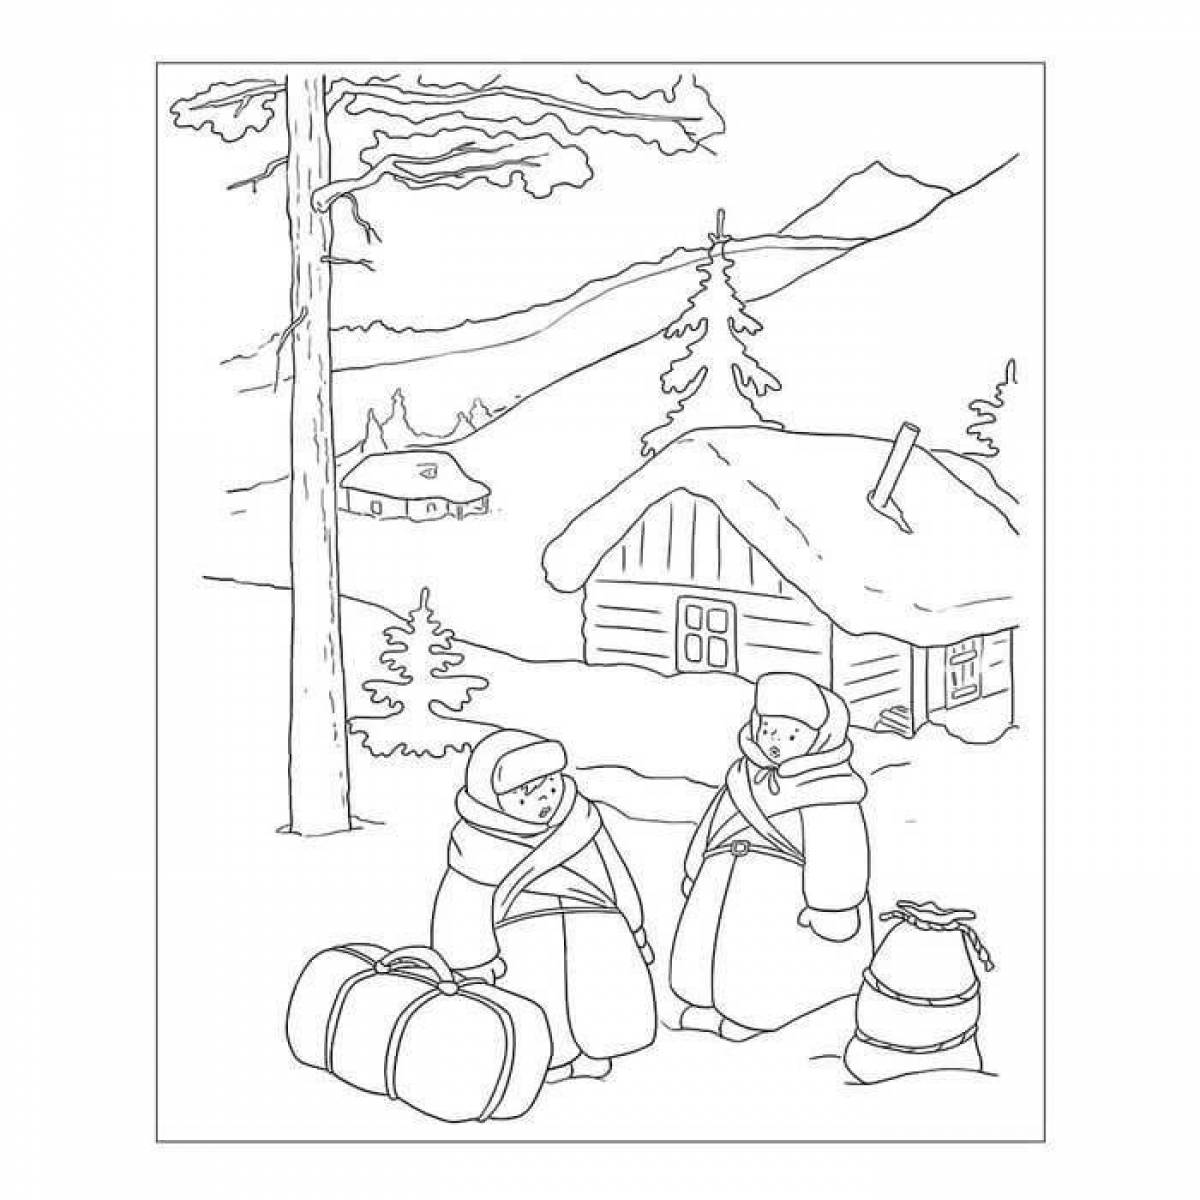 Zany Chuck and Huck coloring page